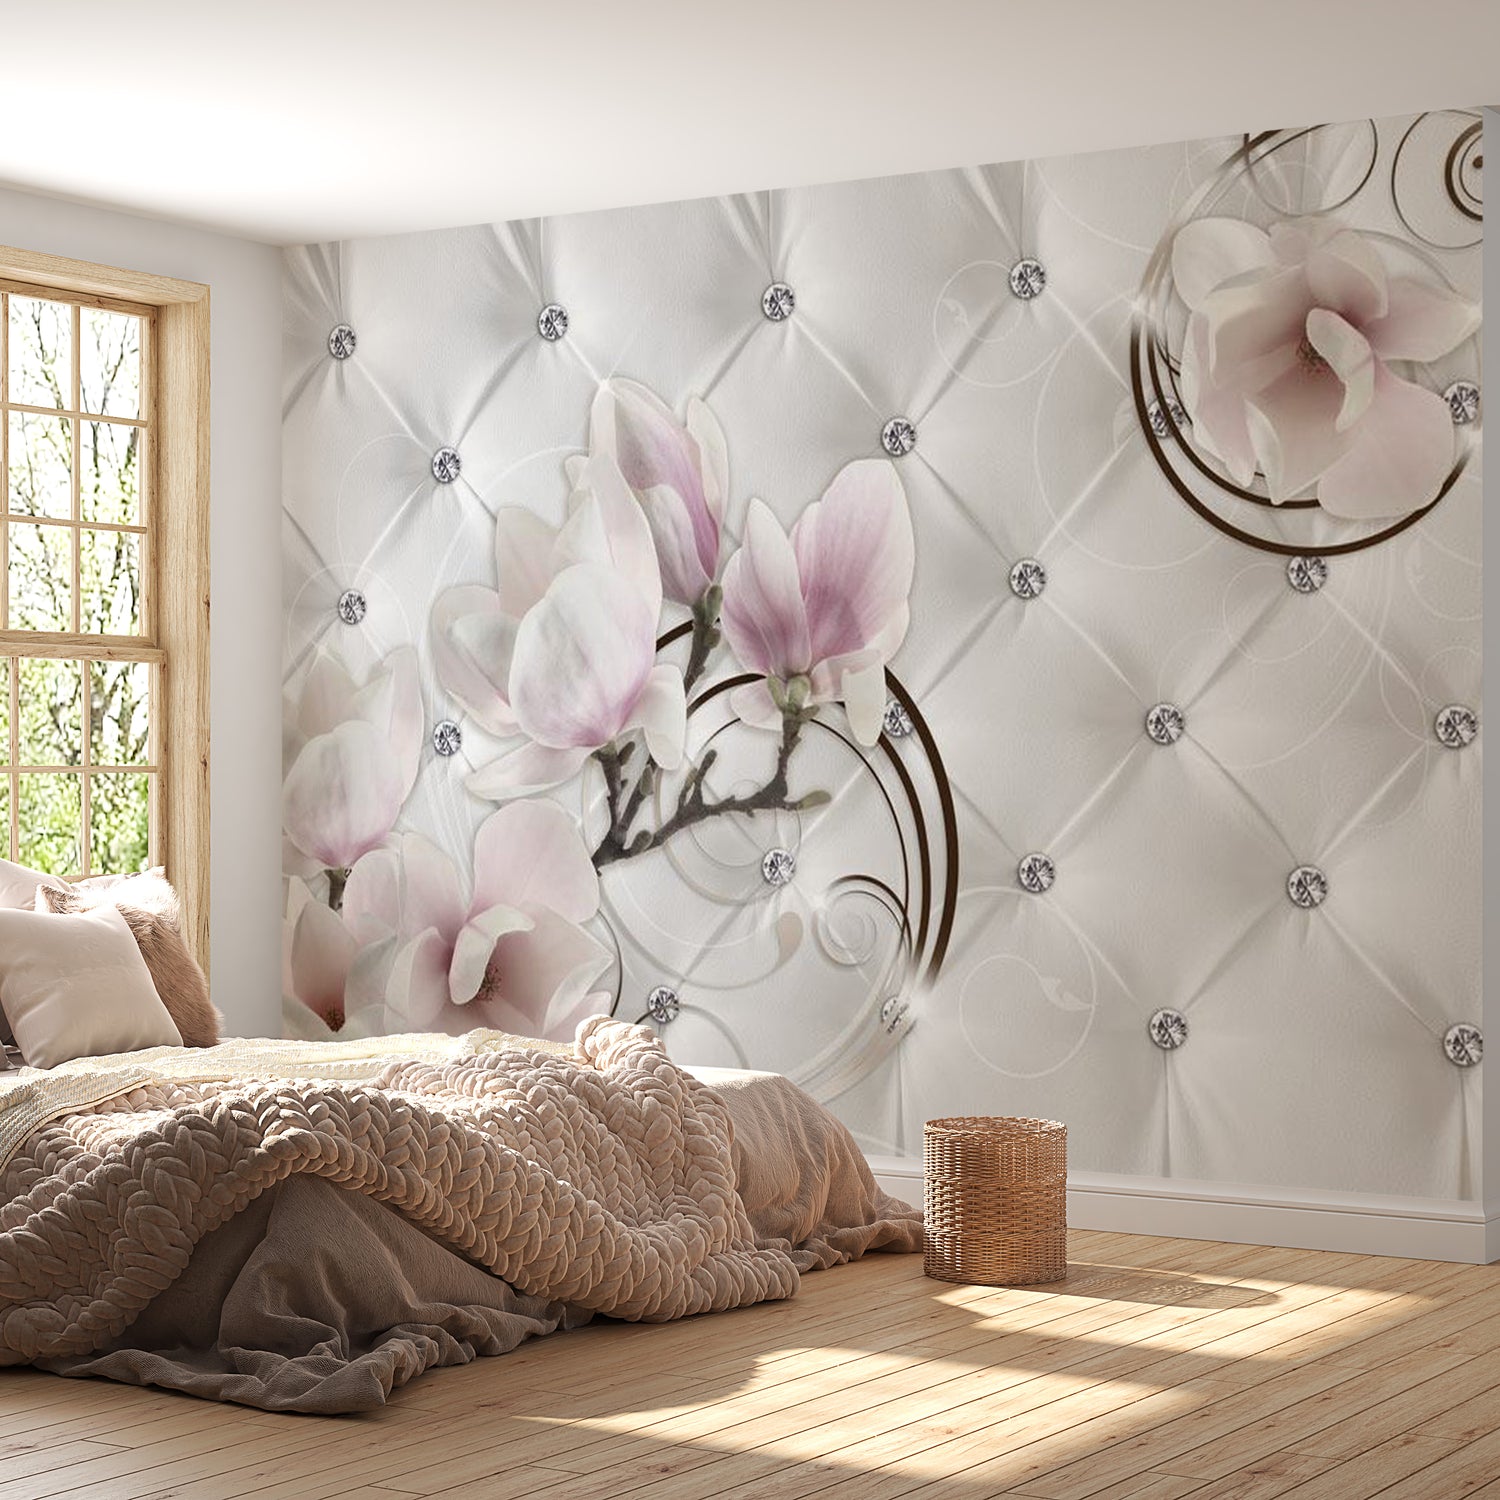 Peel & Stick Floral Wall Mural - Flower Luxury - Removable Wall Decals